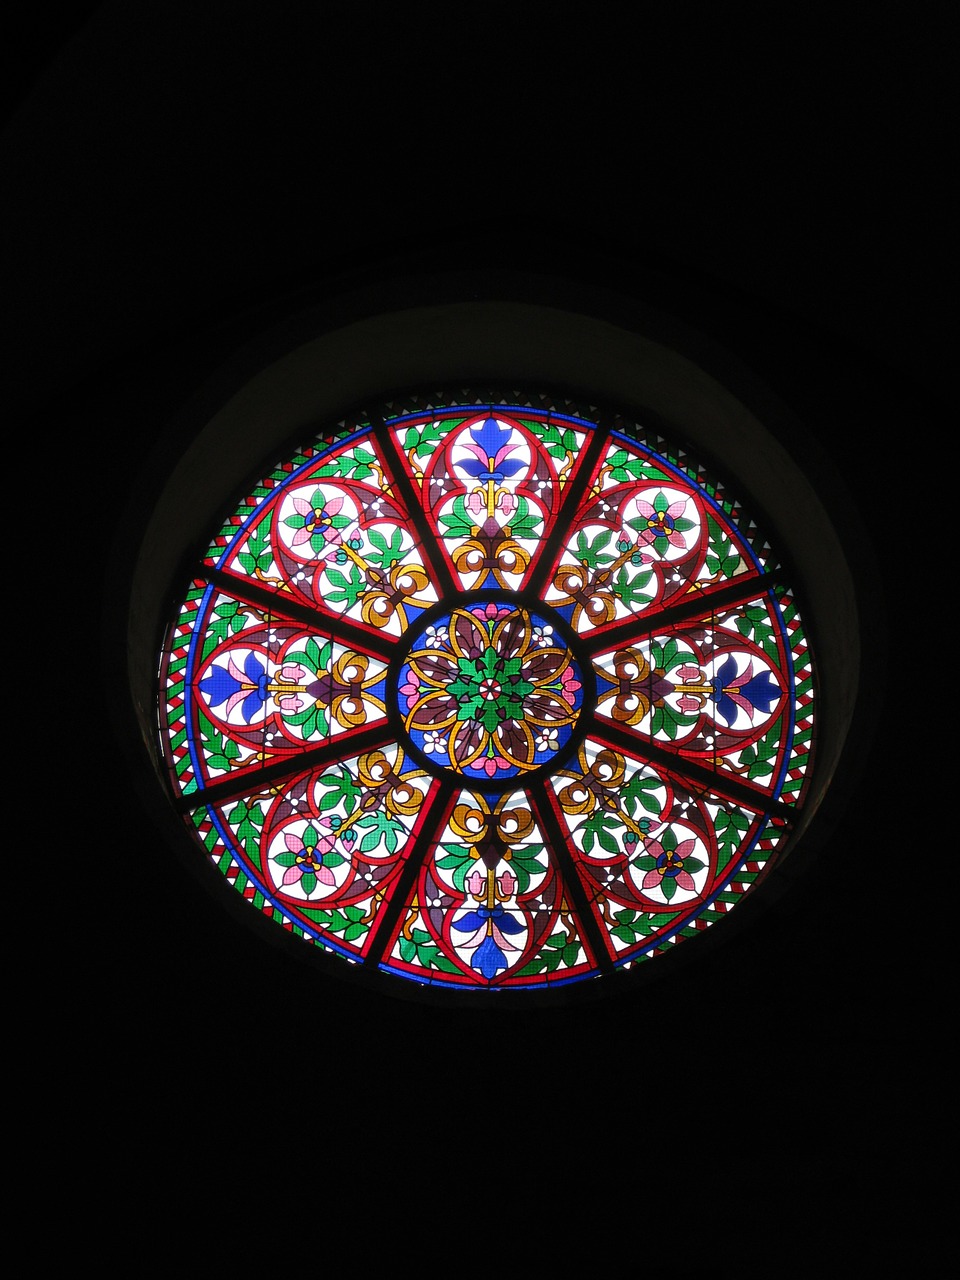 church window stained glass architecture free photo